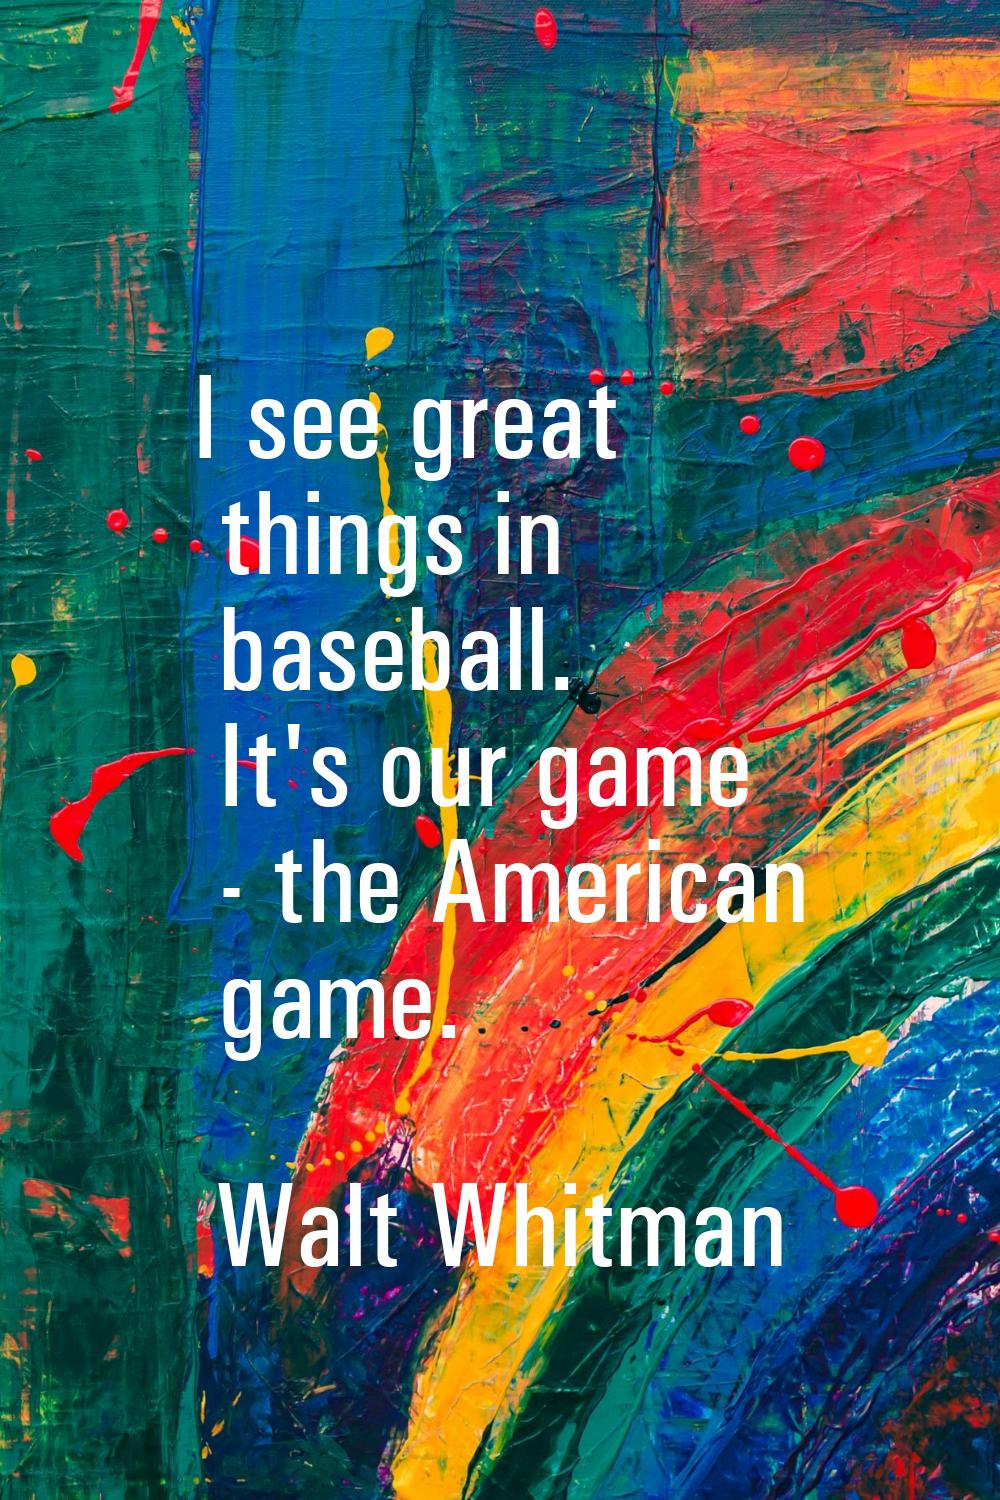 I see great things in baseball. It's our game - the American game.